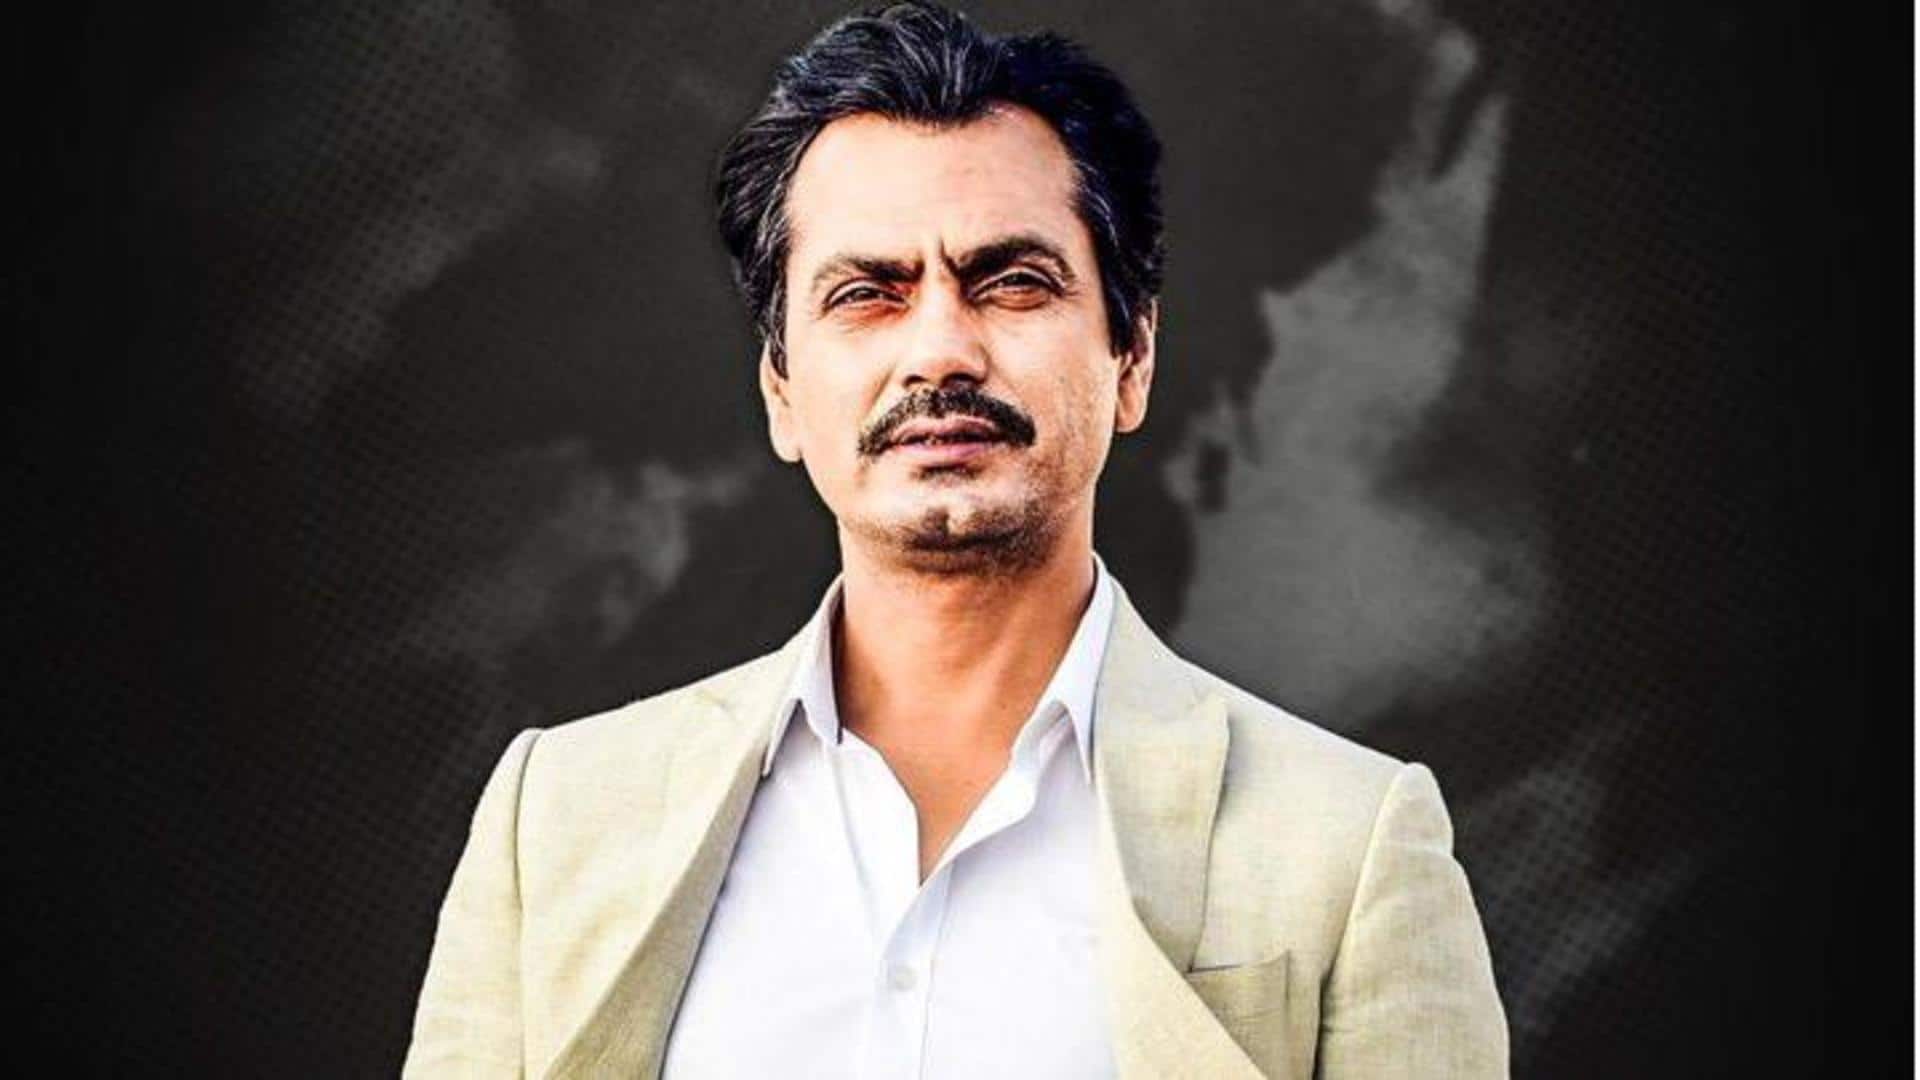 Nawazuddin Siddiqui's domestic help alleges shocking accusations against actor 